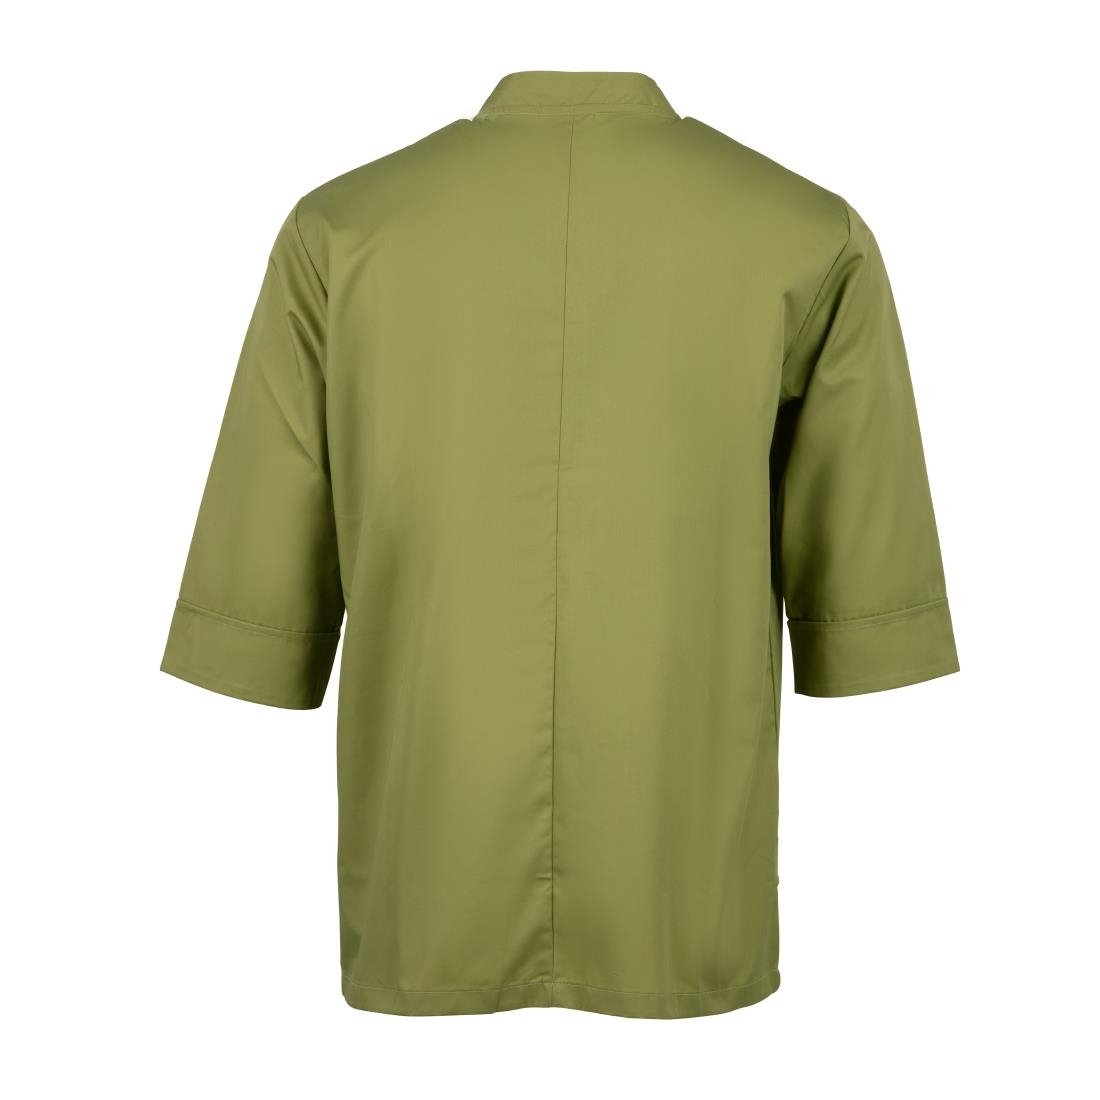 B107-XS Chef Works Unisex Chefs Jacket Lime XS JD Catering Equipment Solutions Ltd